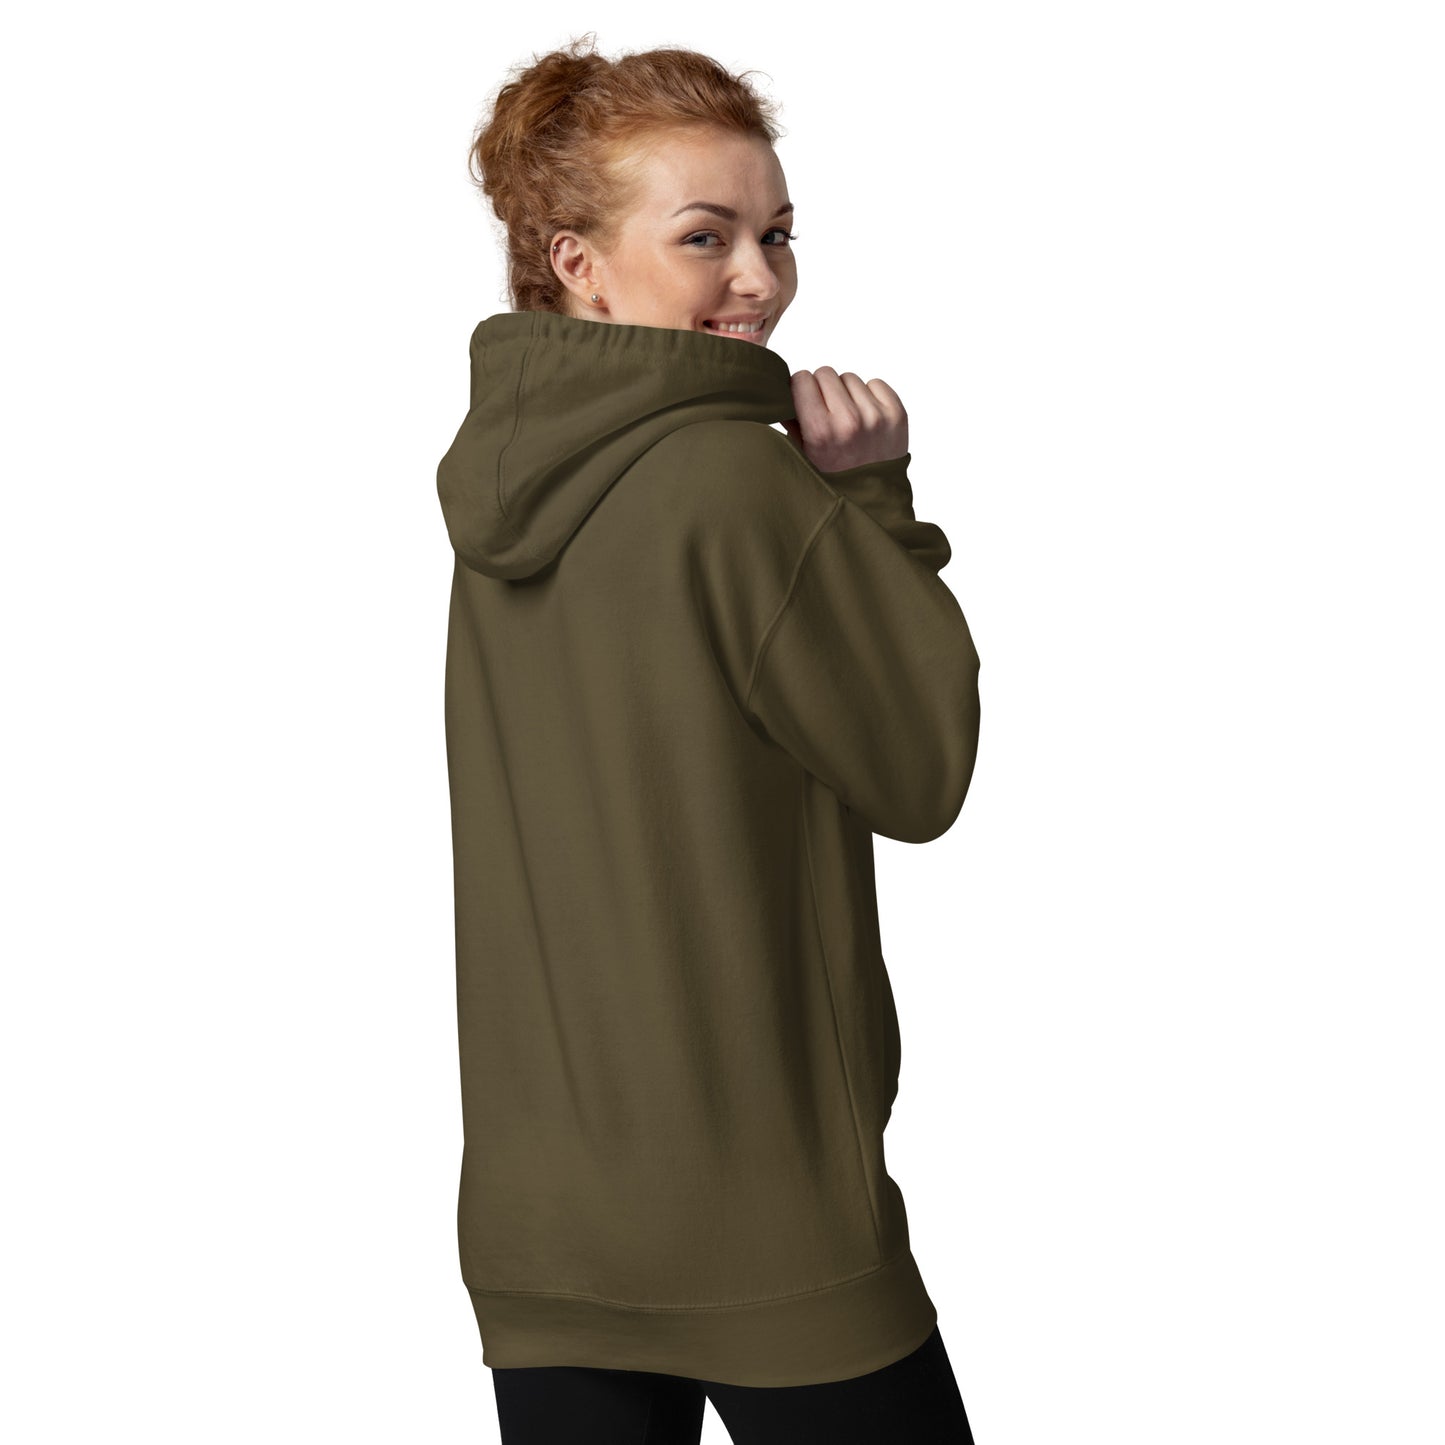 Back-Side view of Storm Castle Peak in Custer Gallatin National Forest Montana Military Green Hoodies for Women from Park Attire